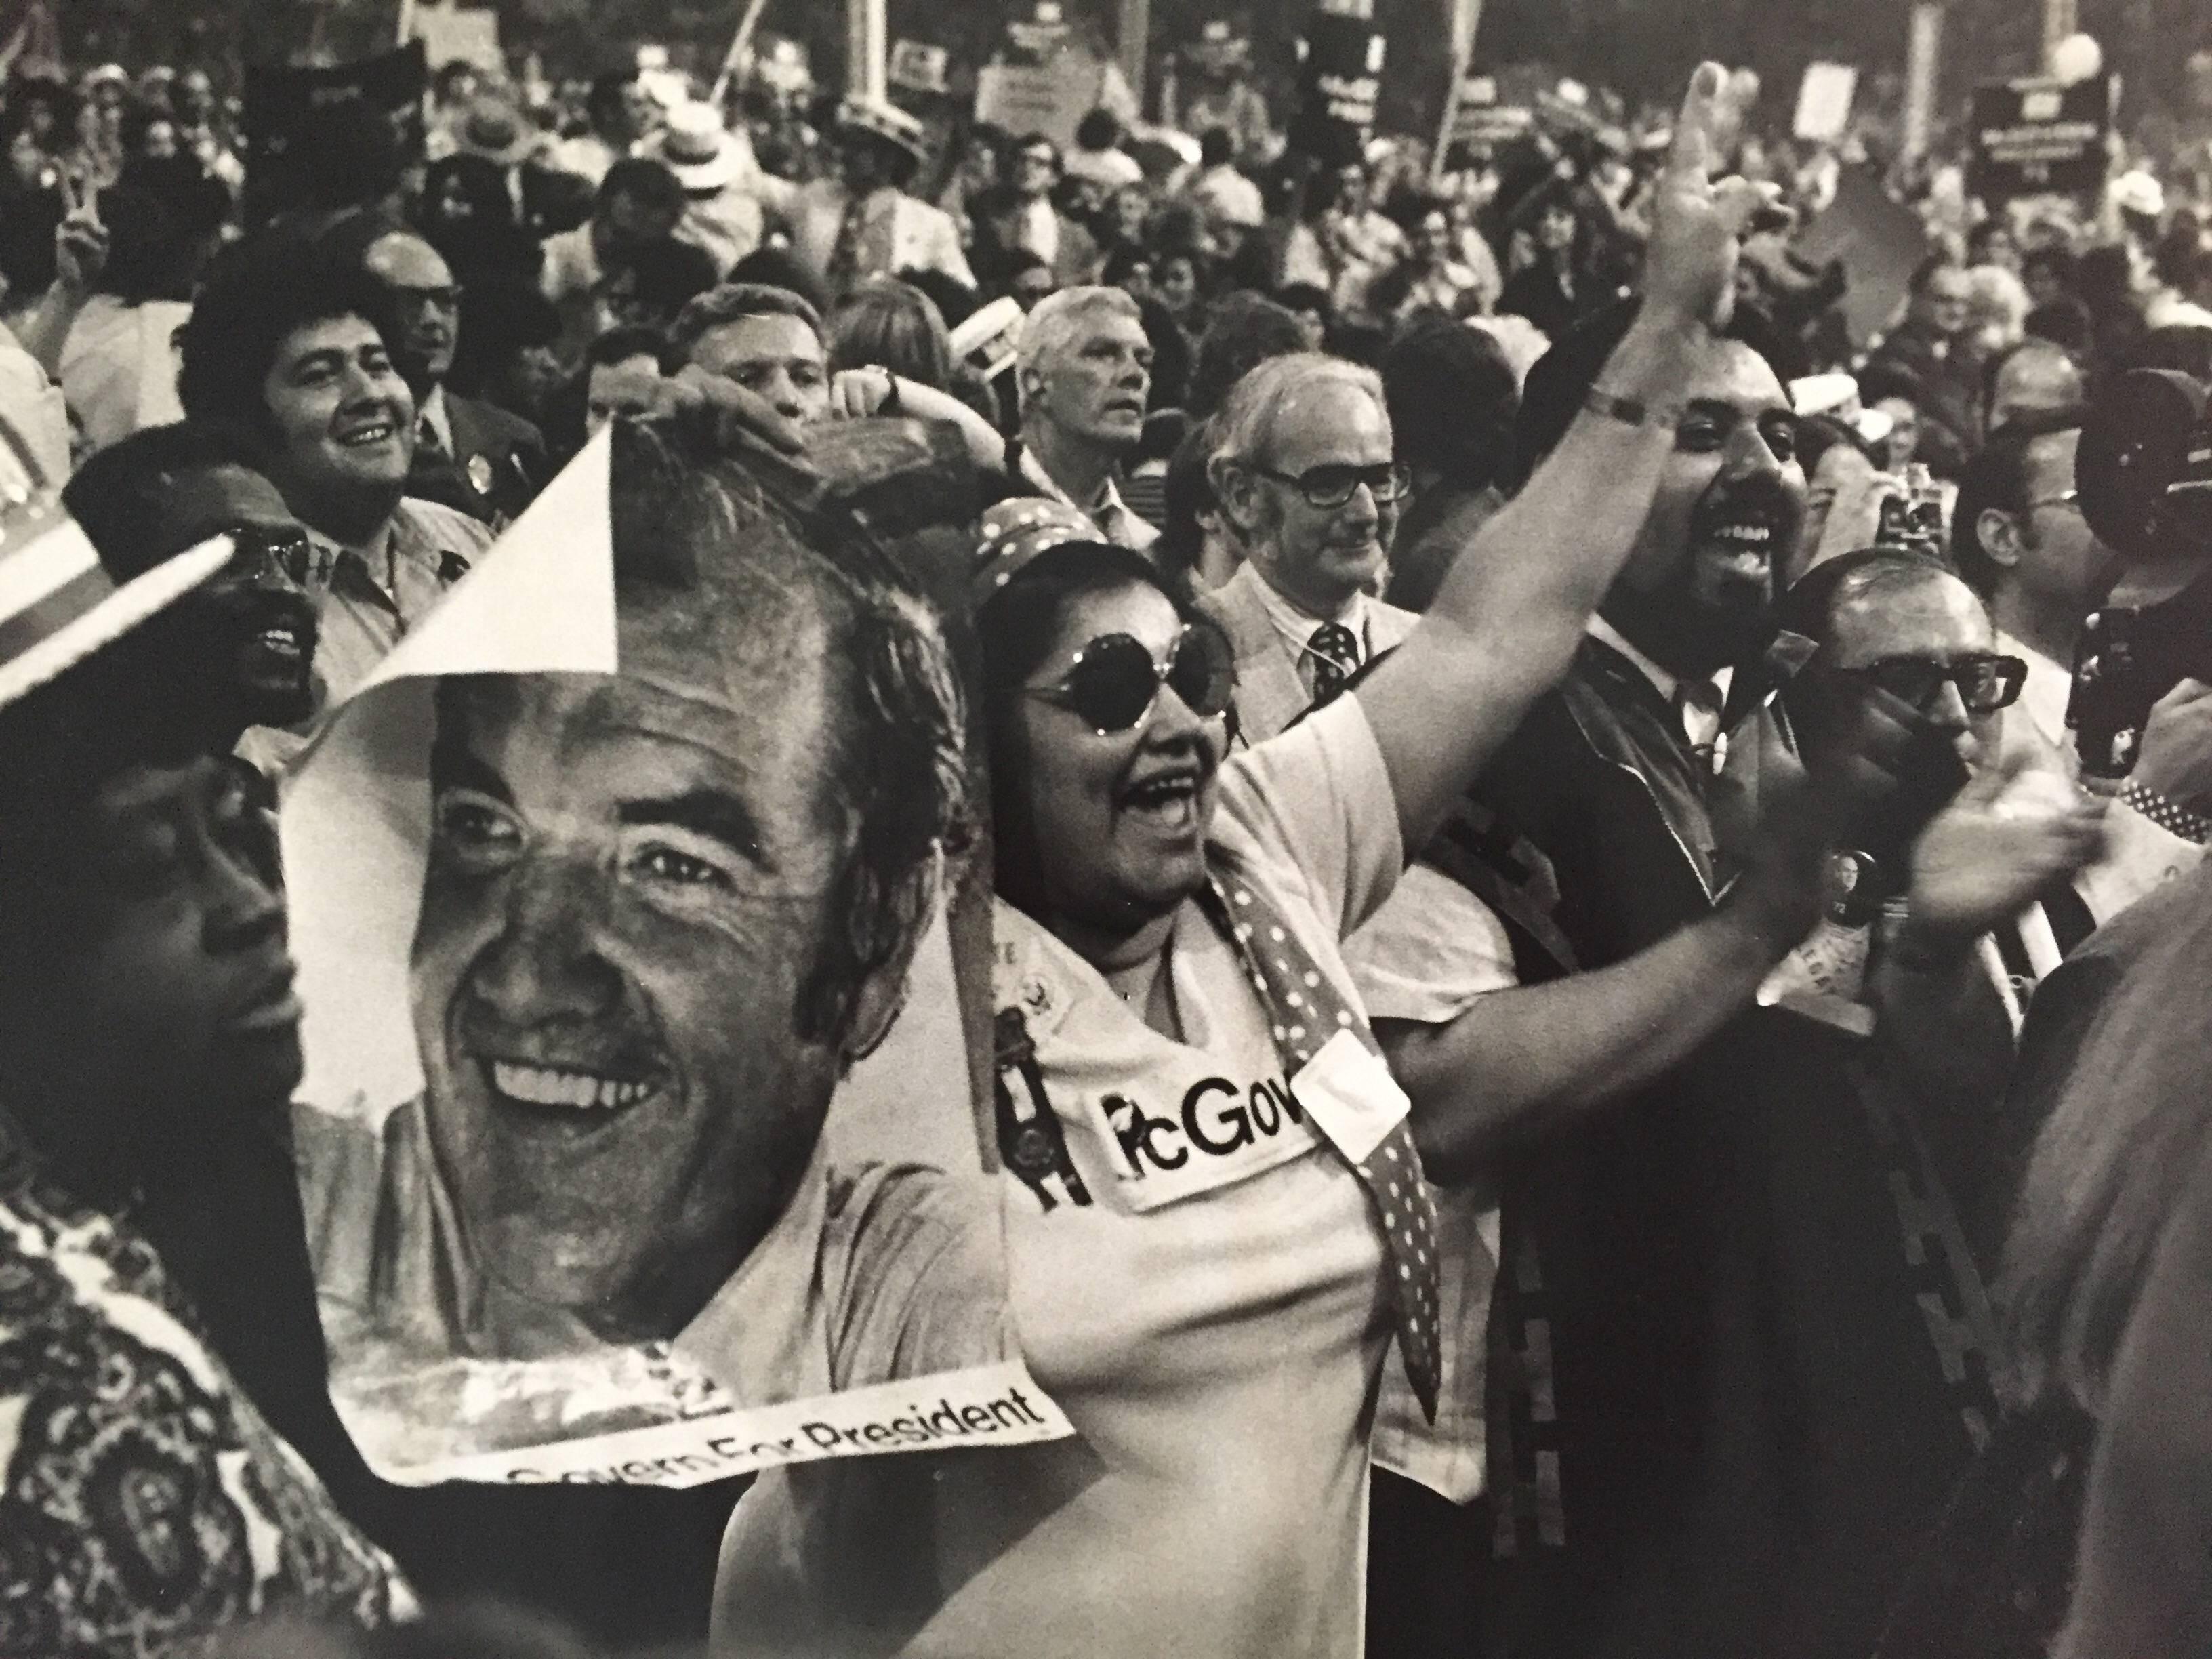 Fred McDarrah Black and White Photograph - Supporters of George McGovern for President